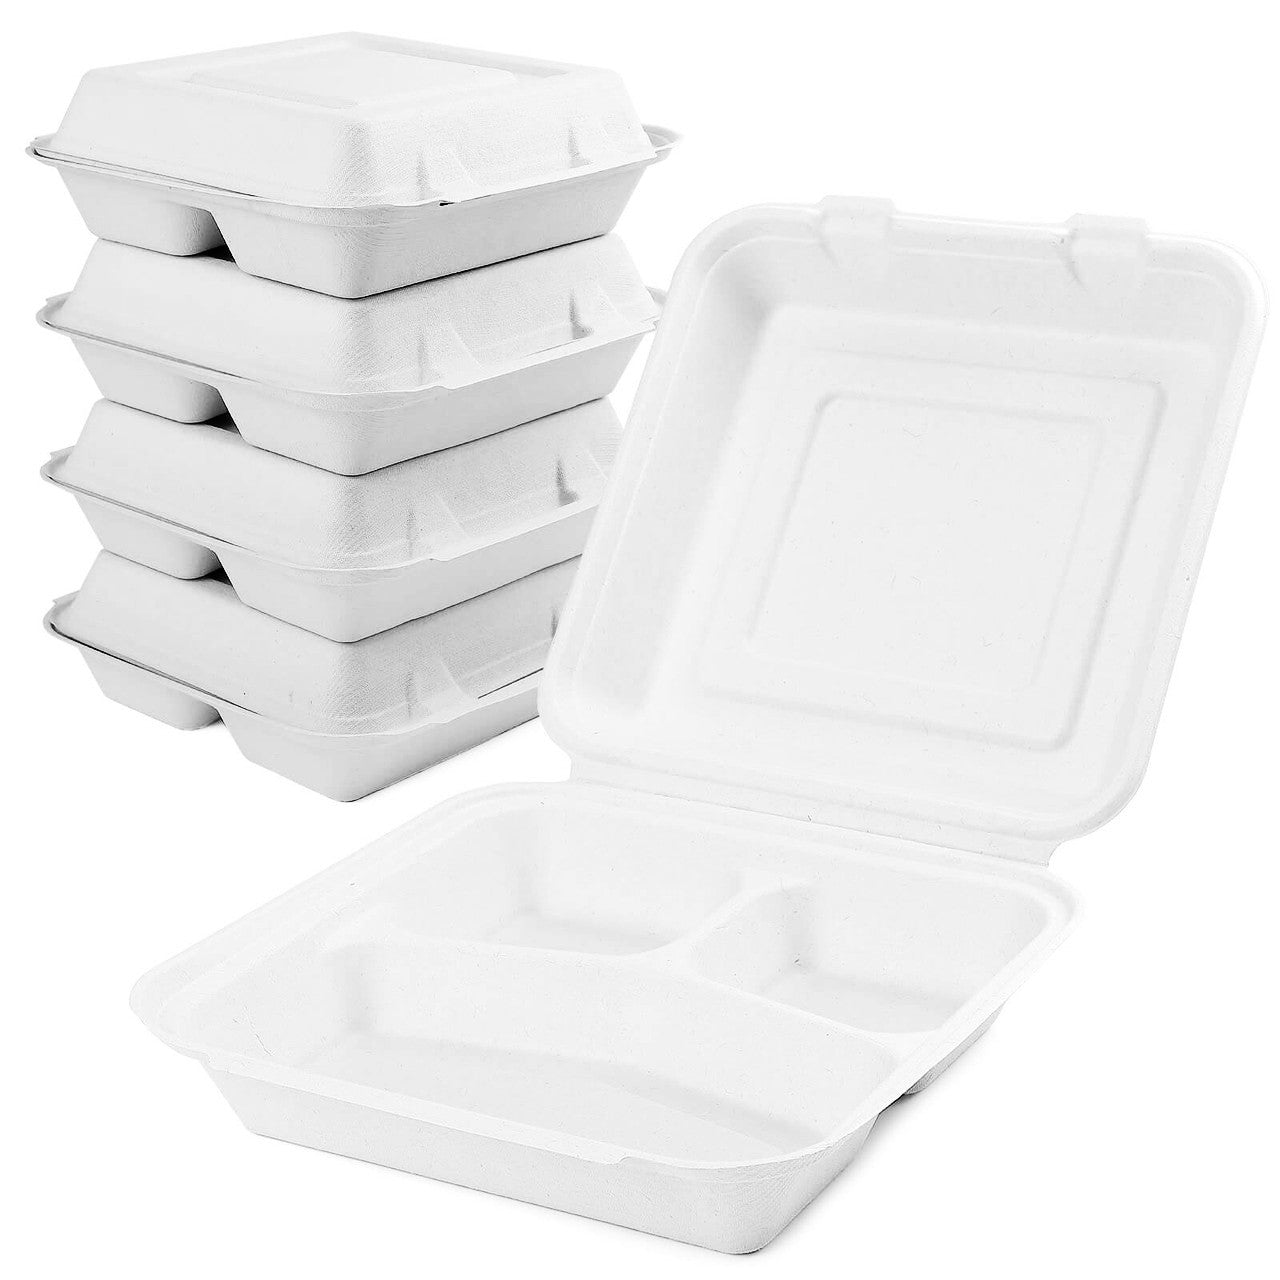 10"x10"x3" 3 Compartment Clamshell Food Containers Natural White 200 pcs